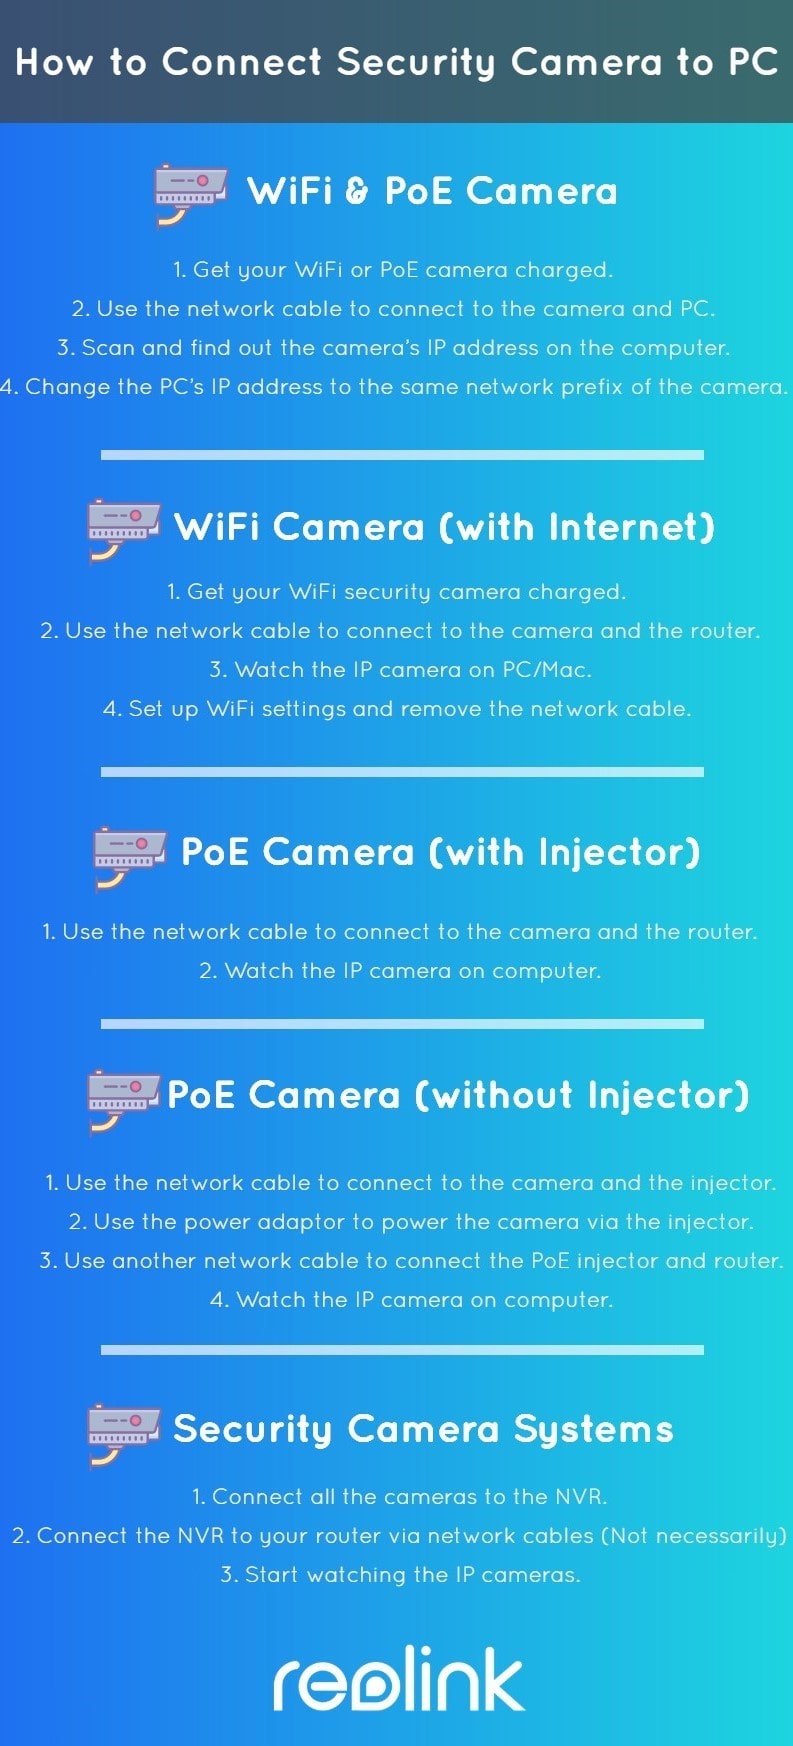 How to Connect Security Camera to PC